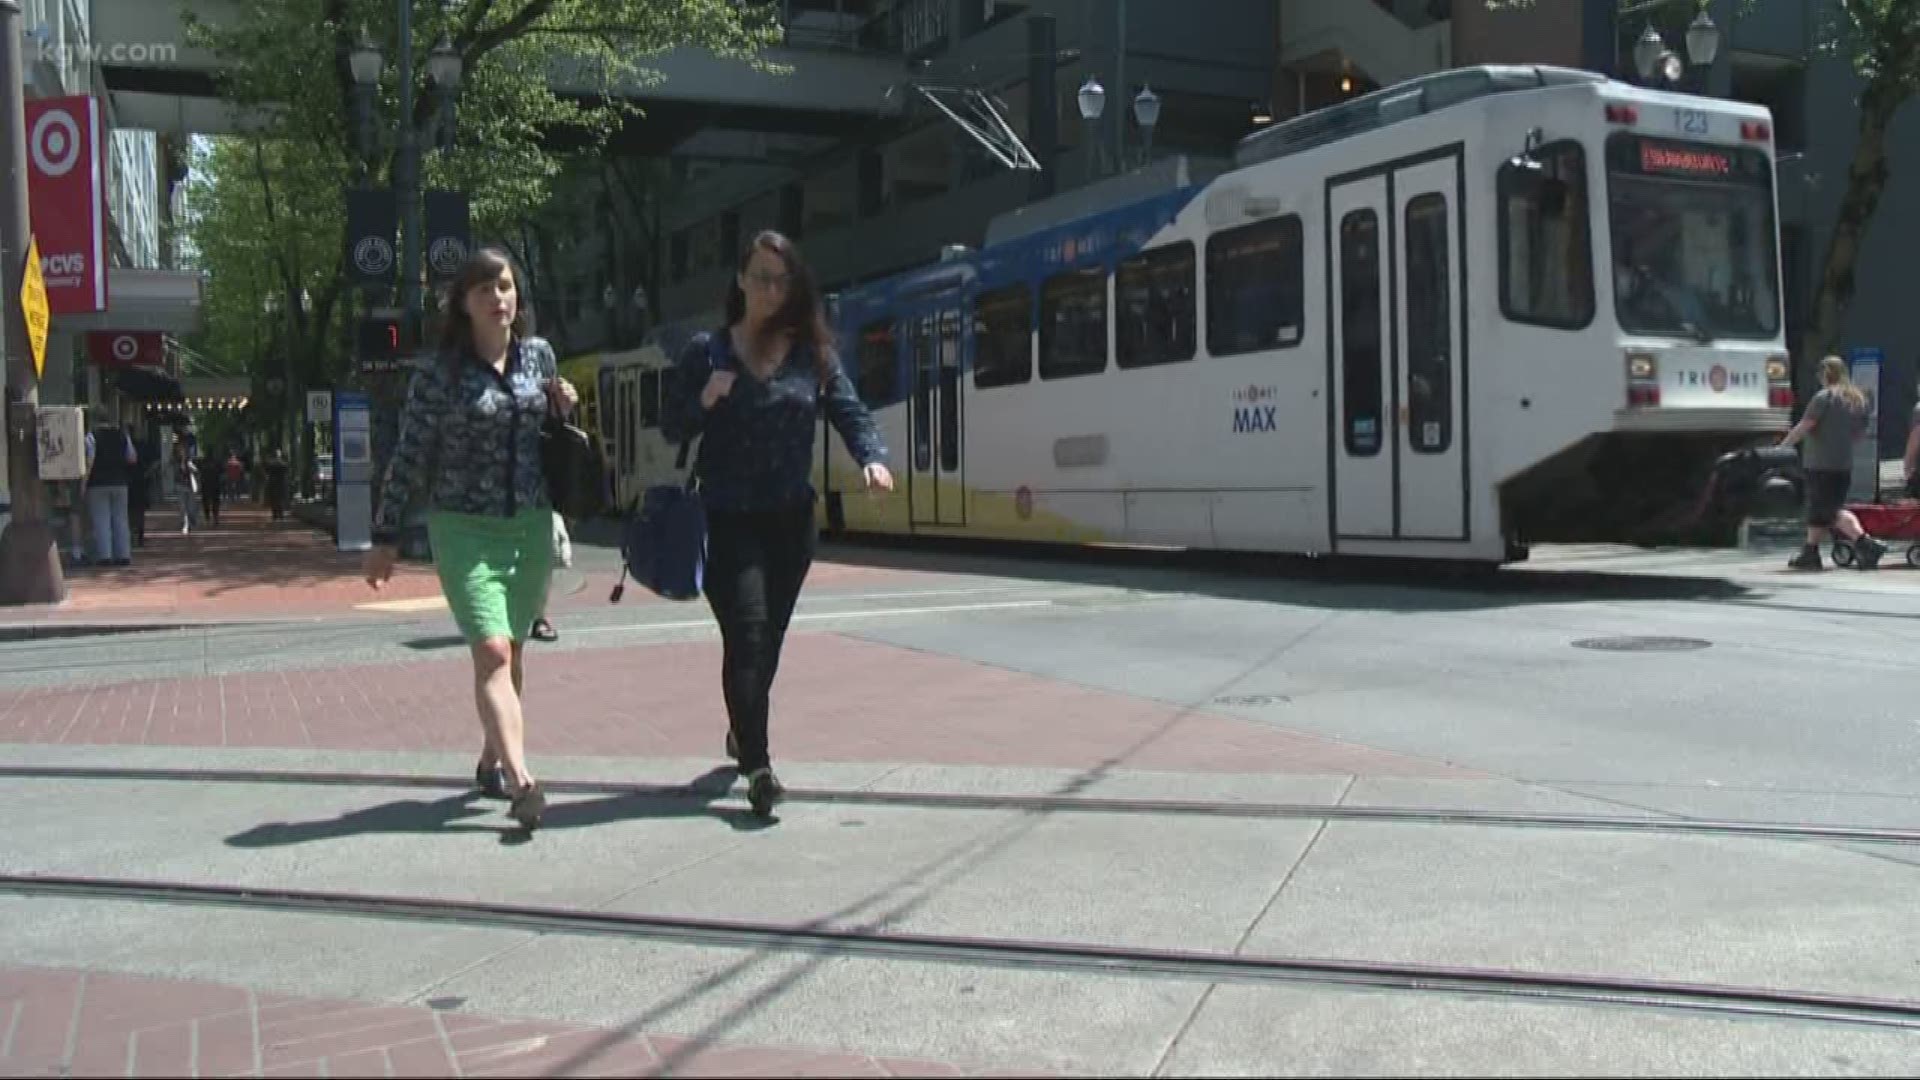 TriMet will have more buses and trains downtown to help people get around during the busy Saturday night.